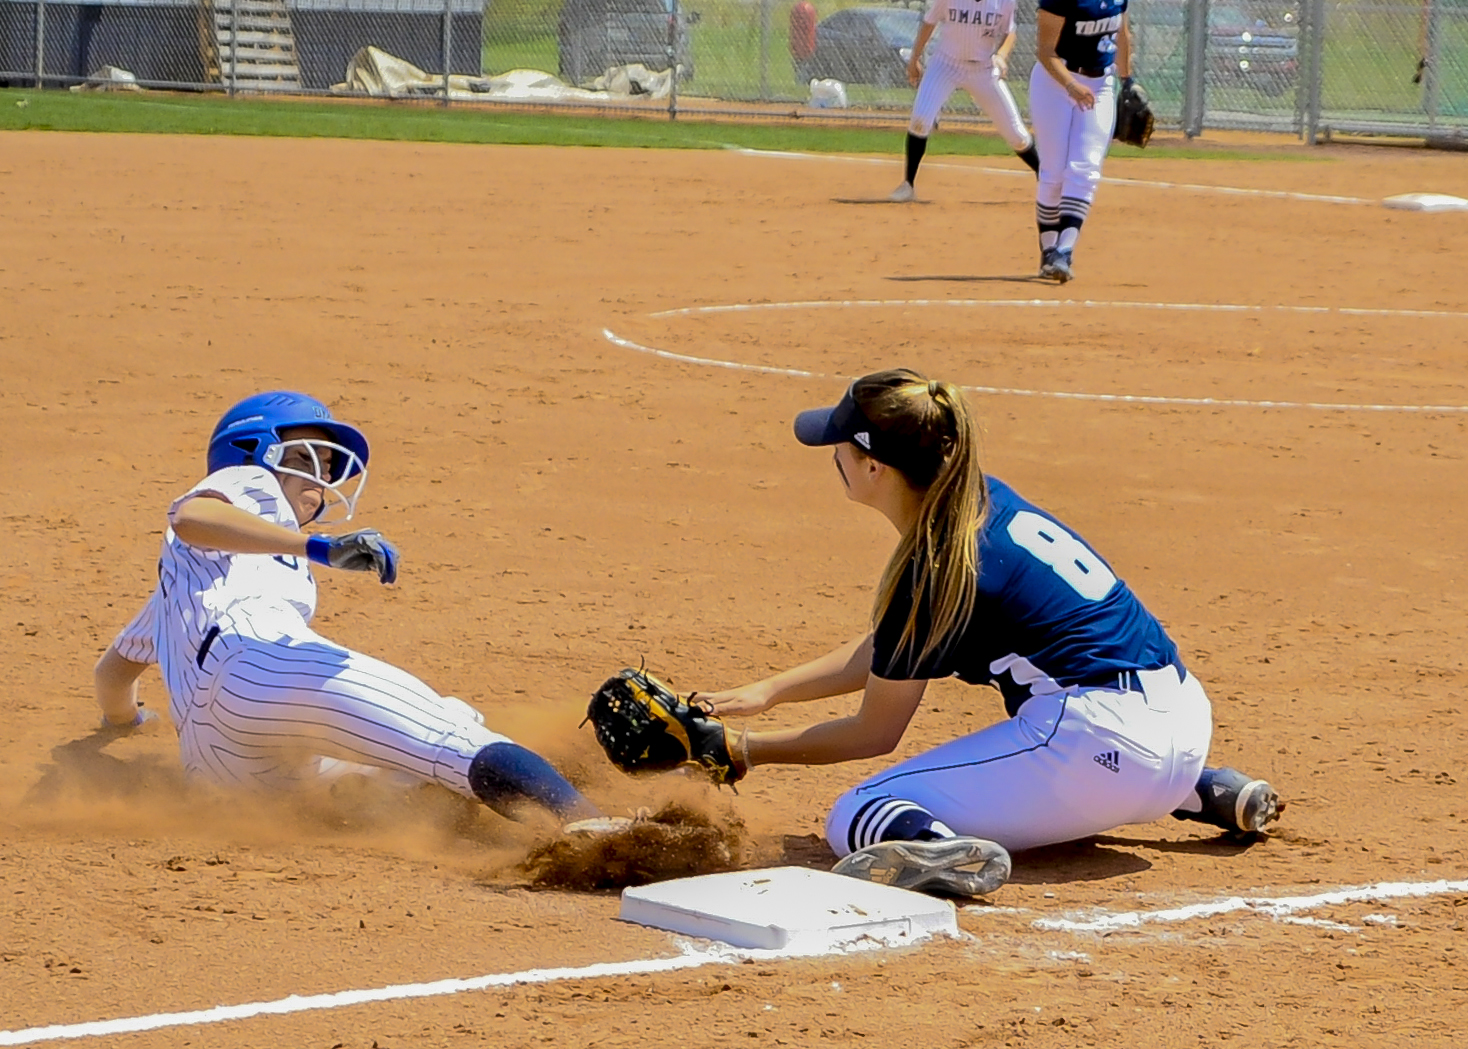 DMACC softball team beats ICCC and SWCC; clinches third consecutive ICCAC championship